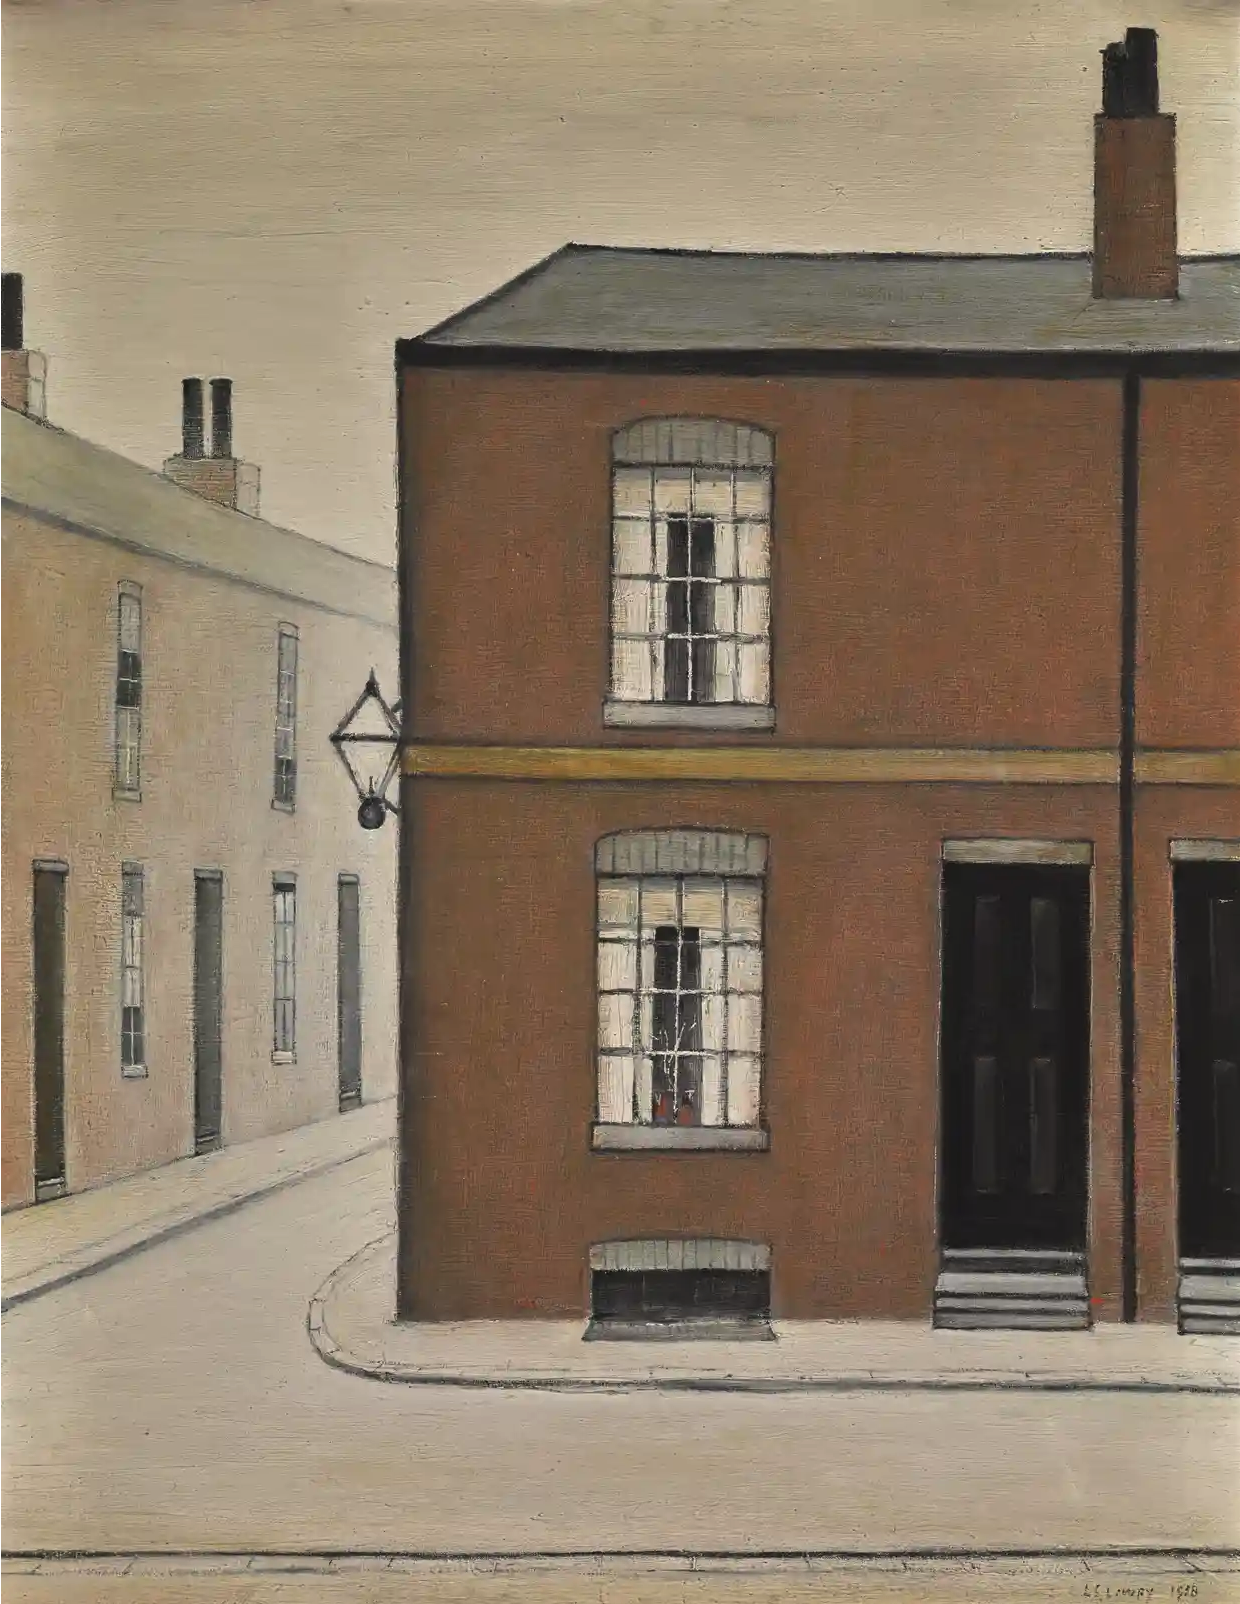 David Lloyd George's birthplace, Manchester (1958) by Laurence Stephen Lowry (1887 - 1976), English artist.